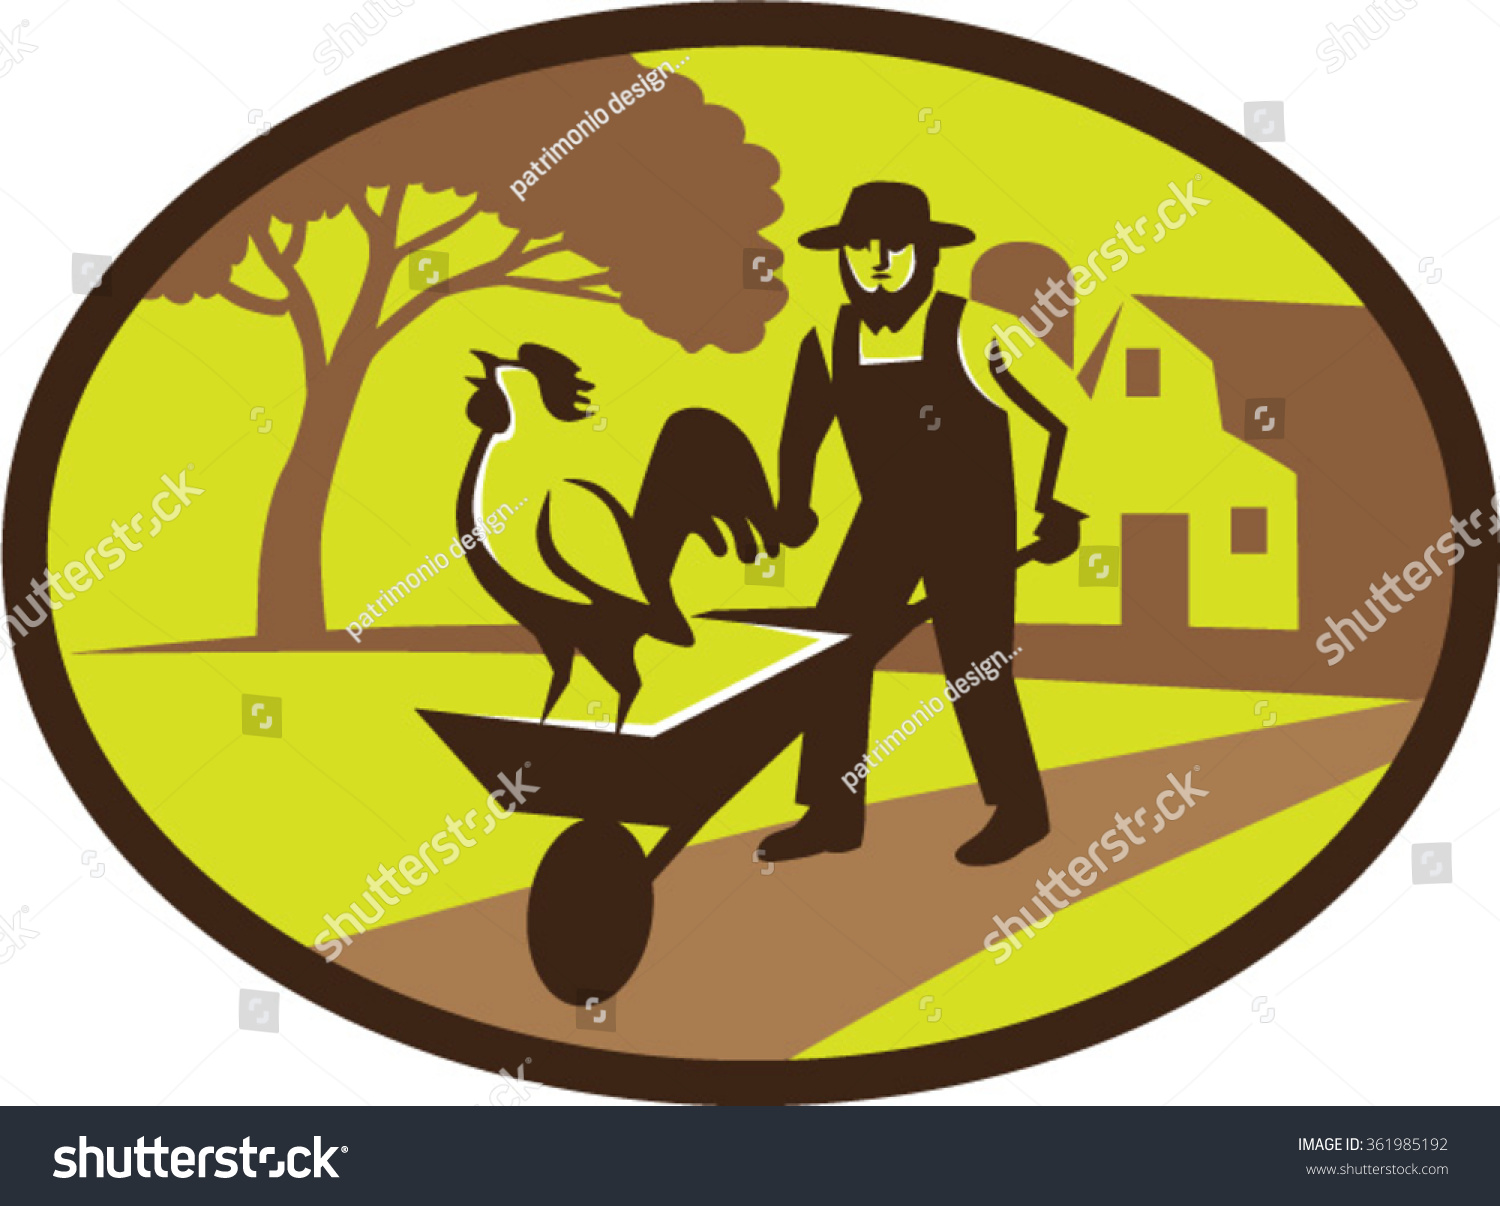 SVG of Illustration of an amish farmer wearing hat holding wheelbarrow with rooster on top set inside oval shape with tree and farmhouse in the background done in retro style.  svg